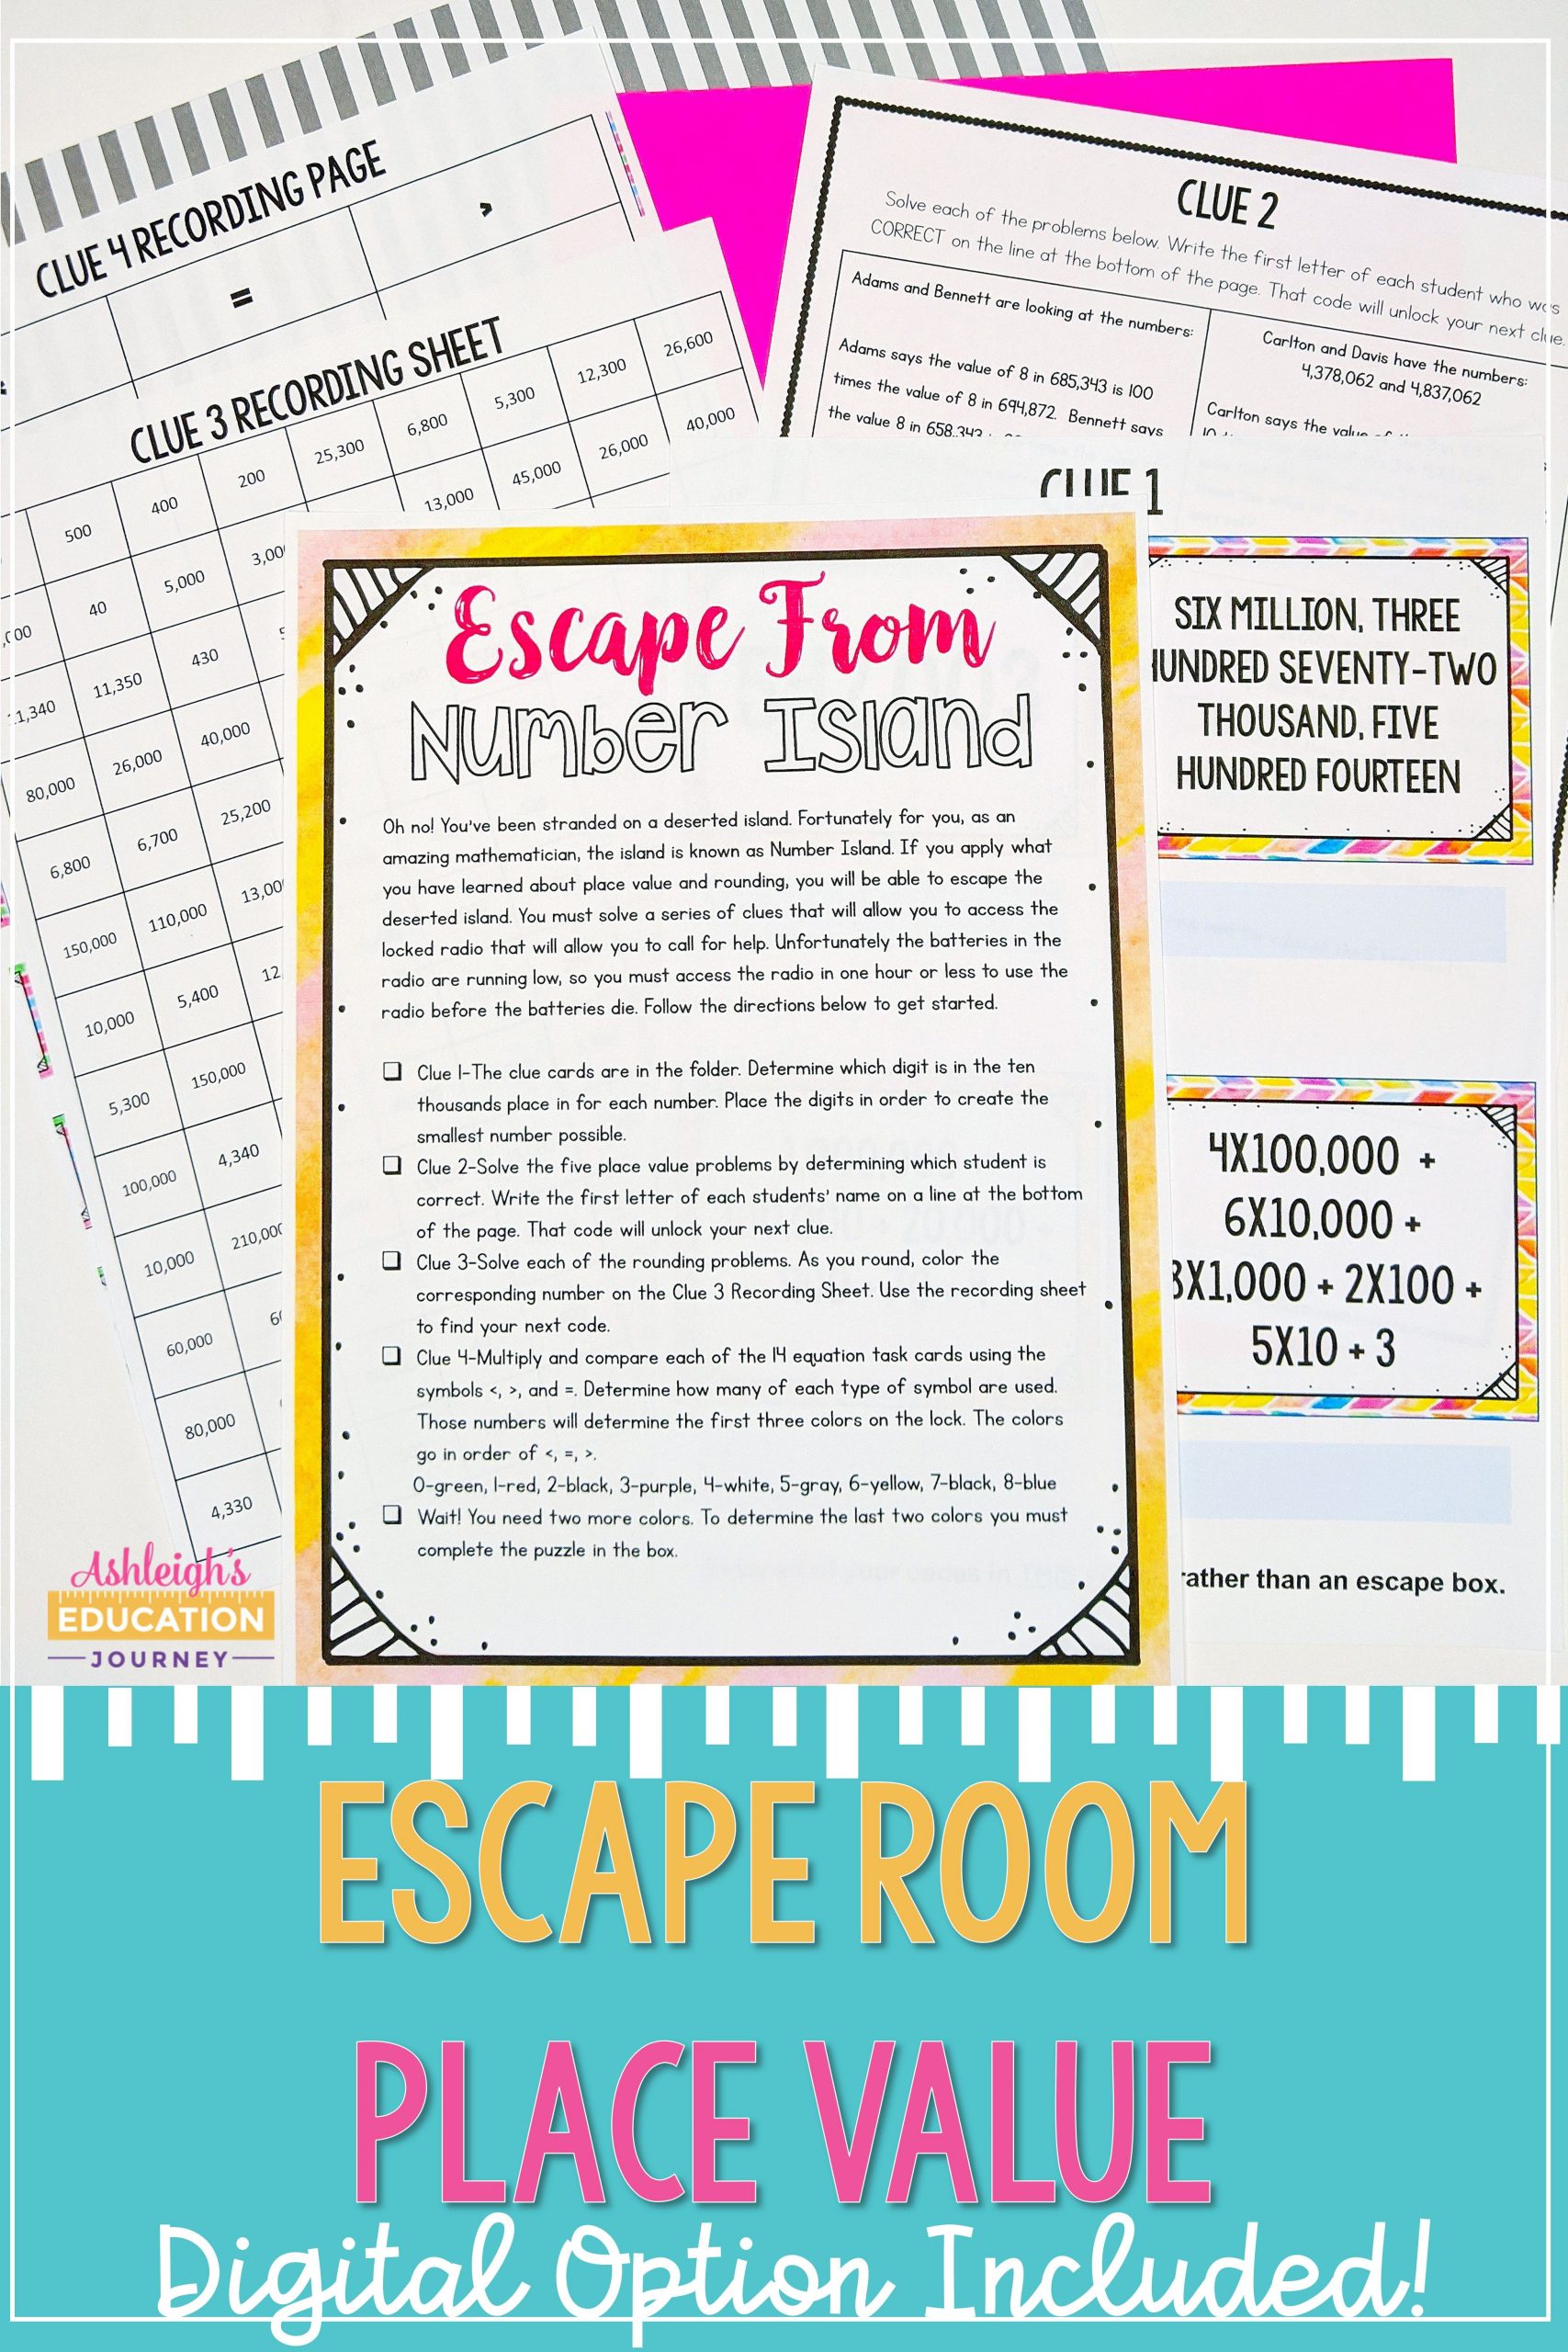 Place Value Lesson Plan Escape From Number island A Place Value Breakout Project